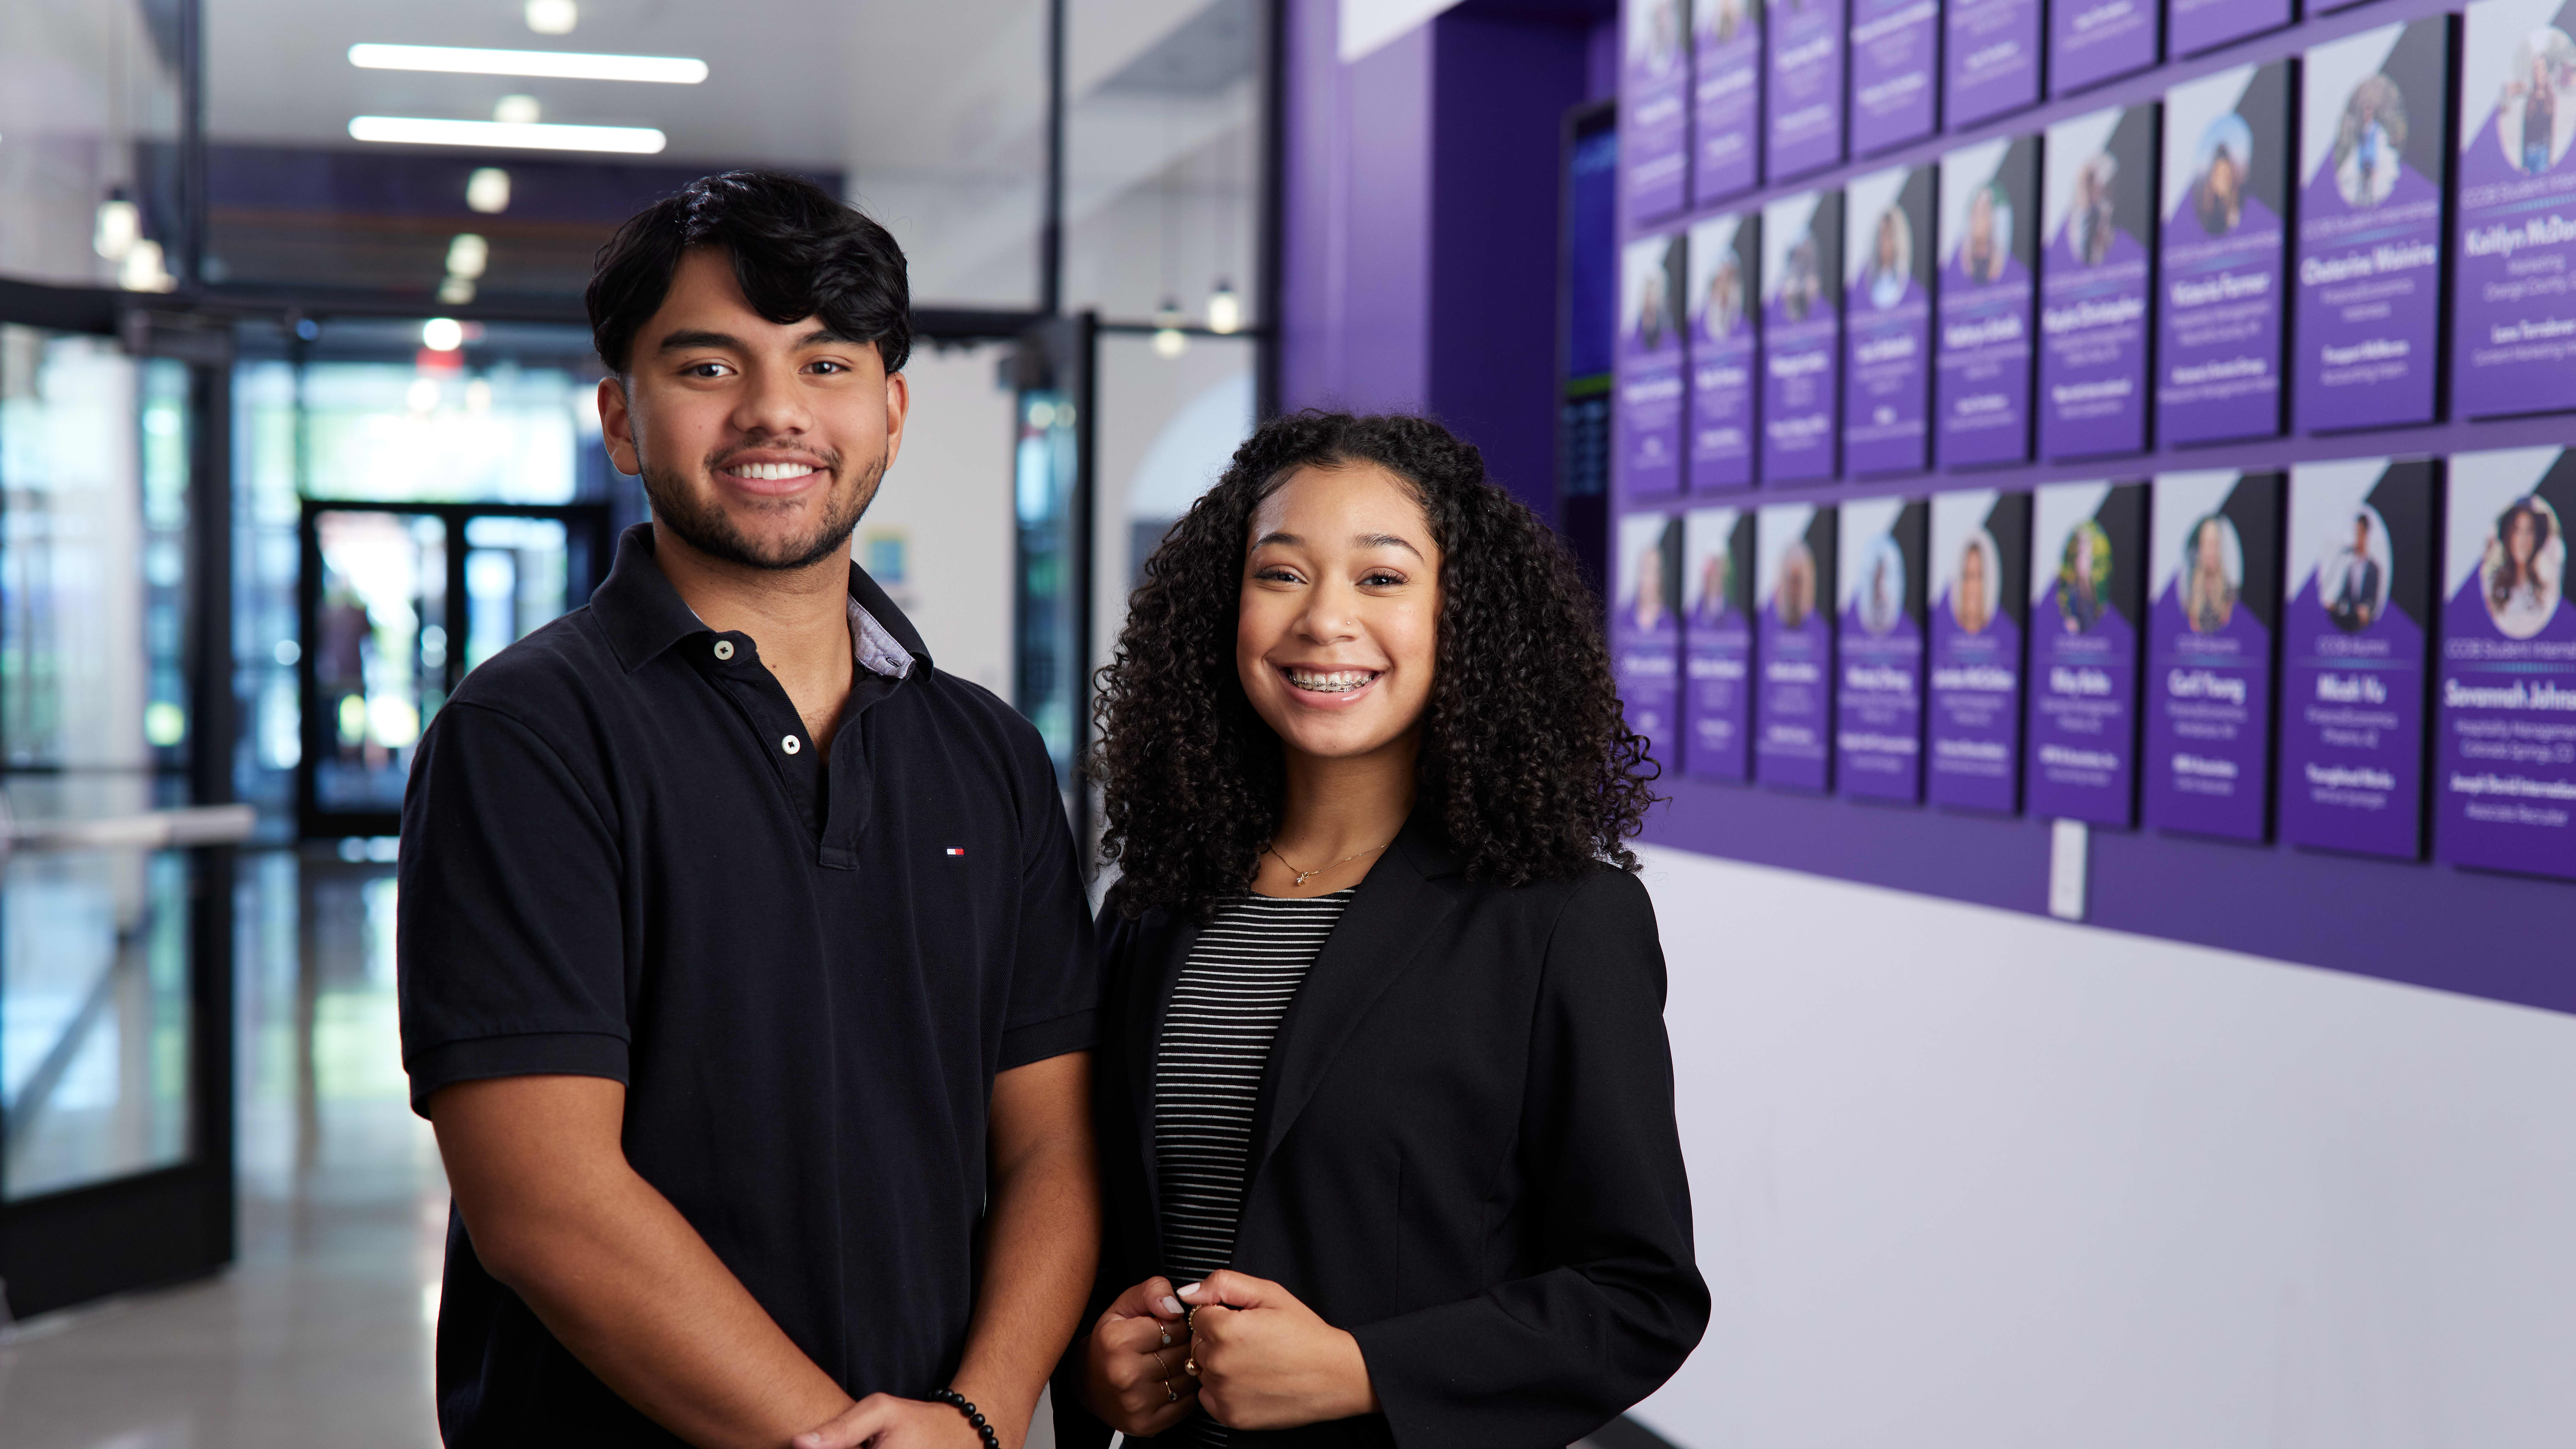 Male and female business master's degree students smiling in GCU hallway